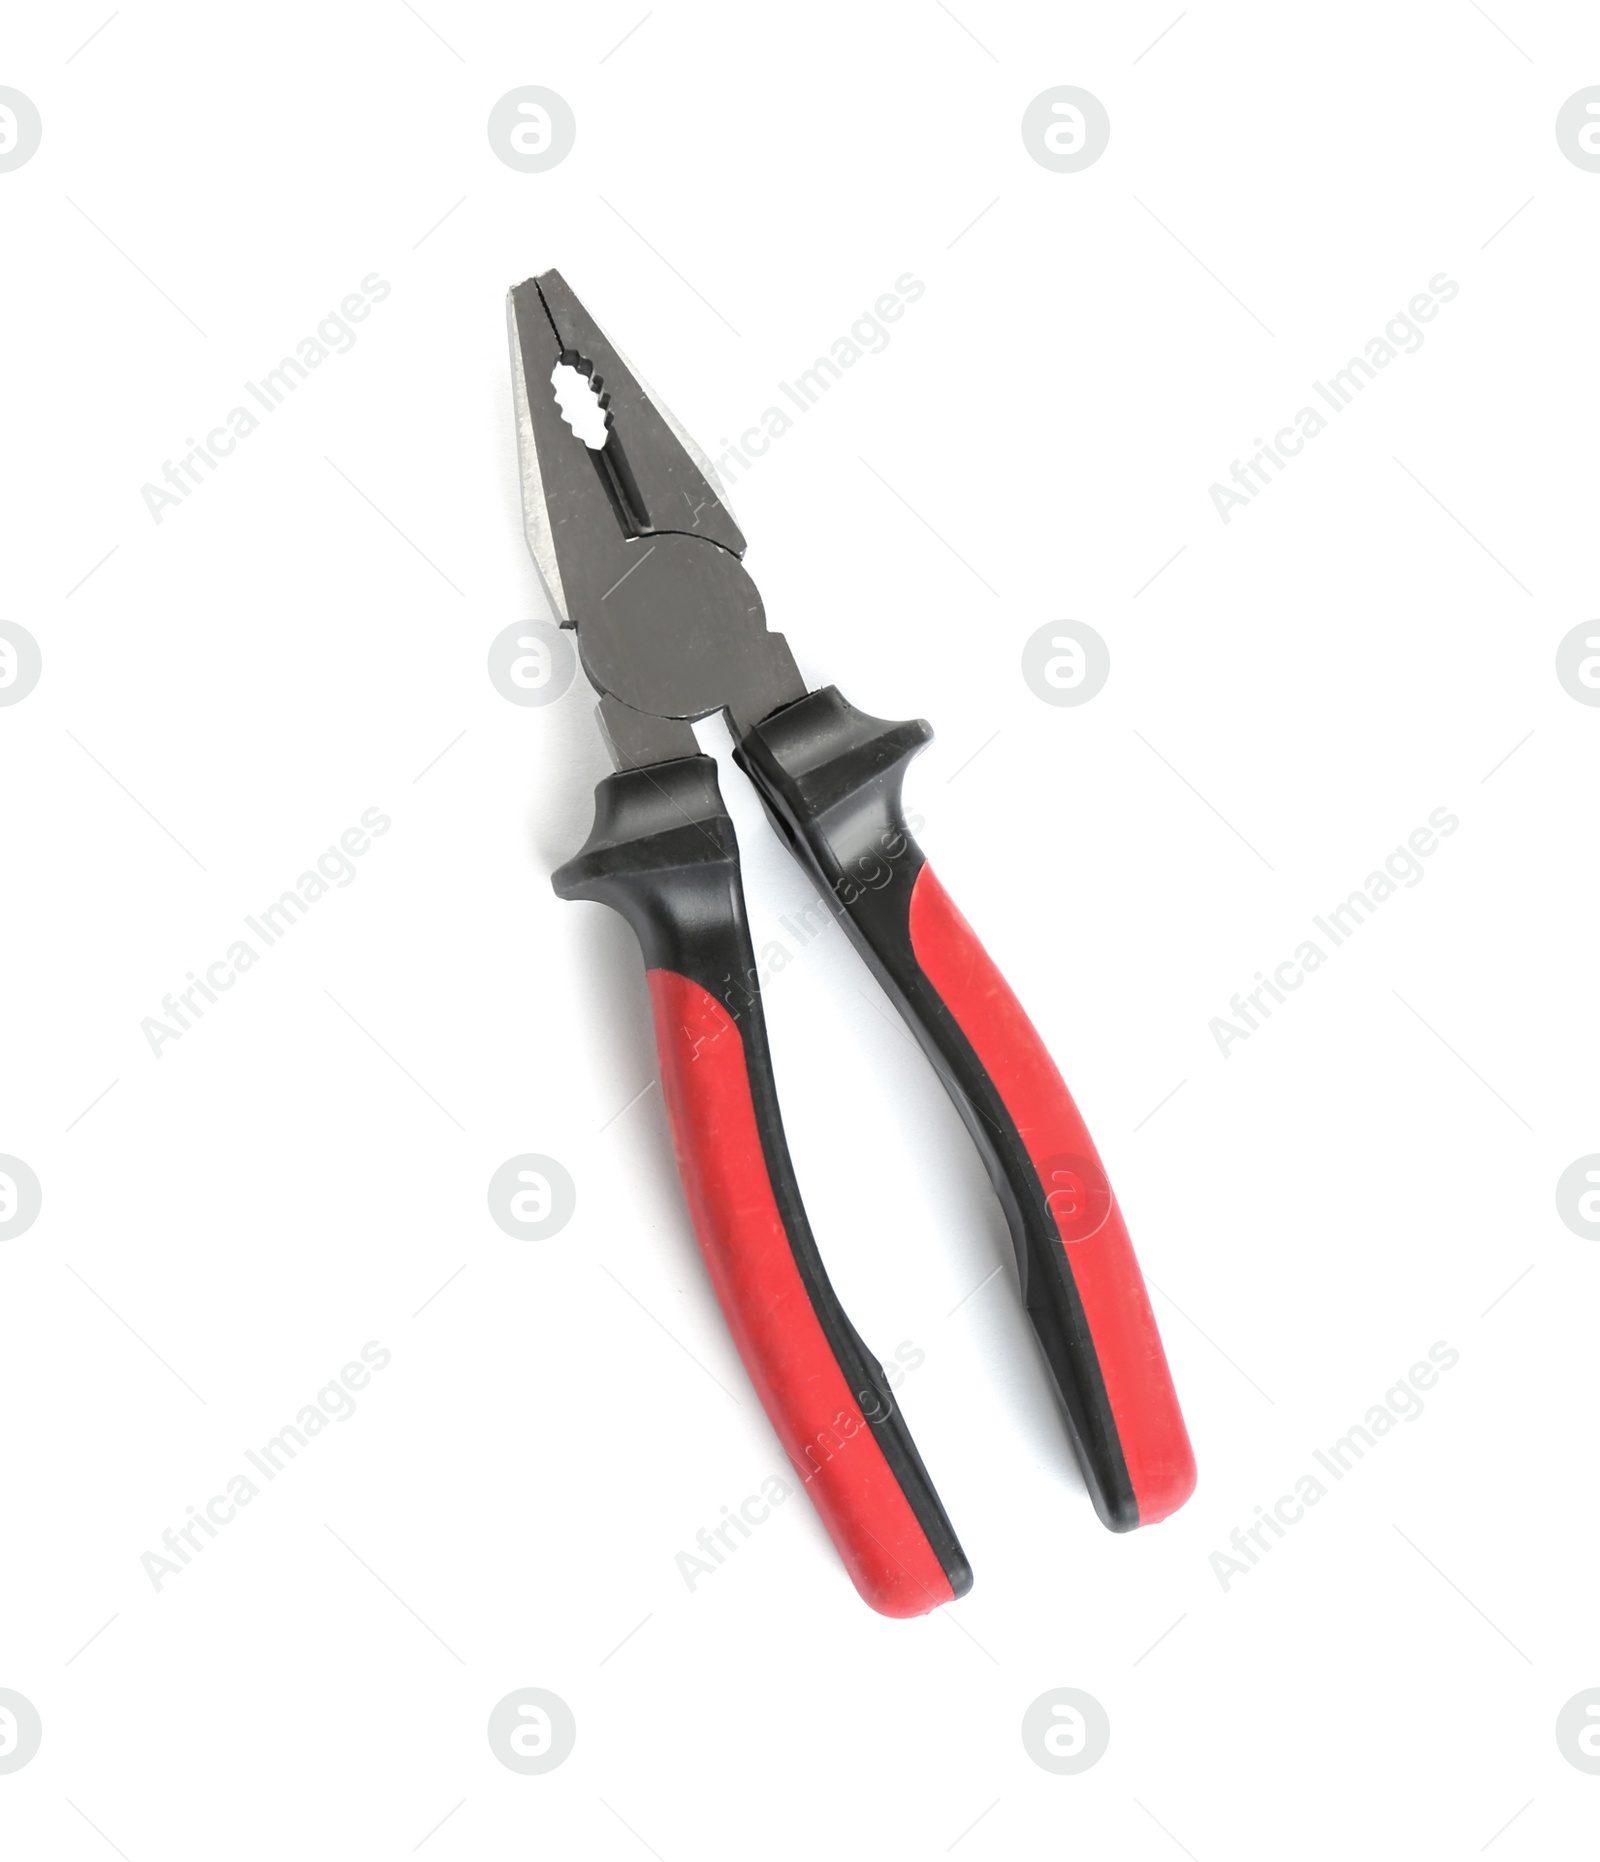 Photo of New pliers on white background, top view. Construction tools